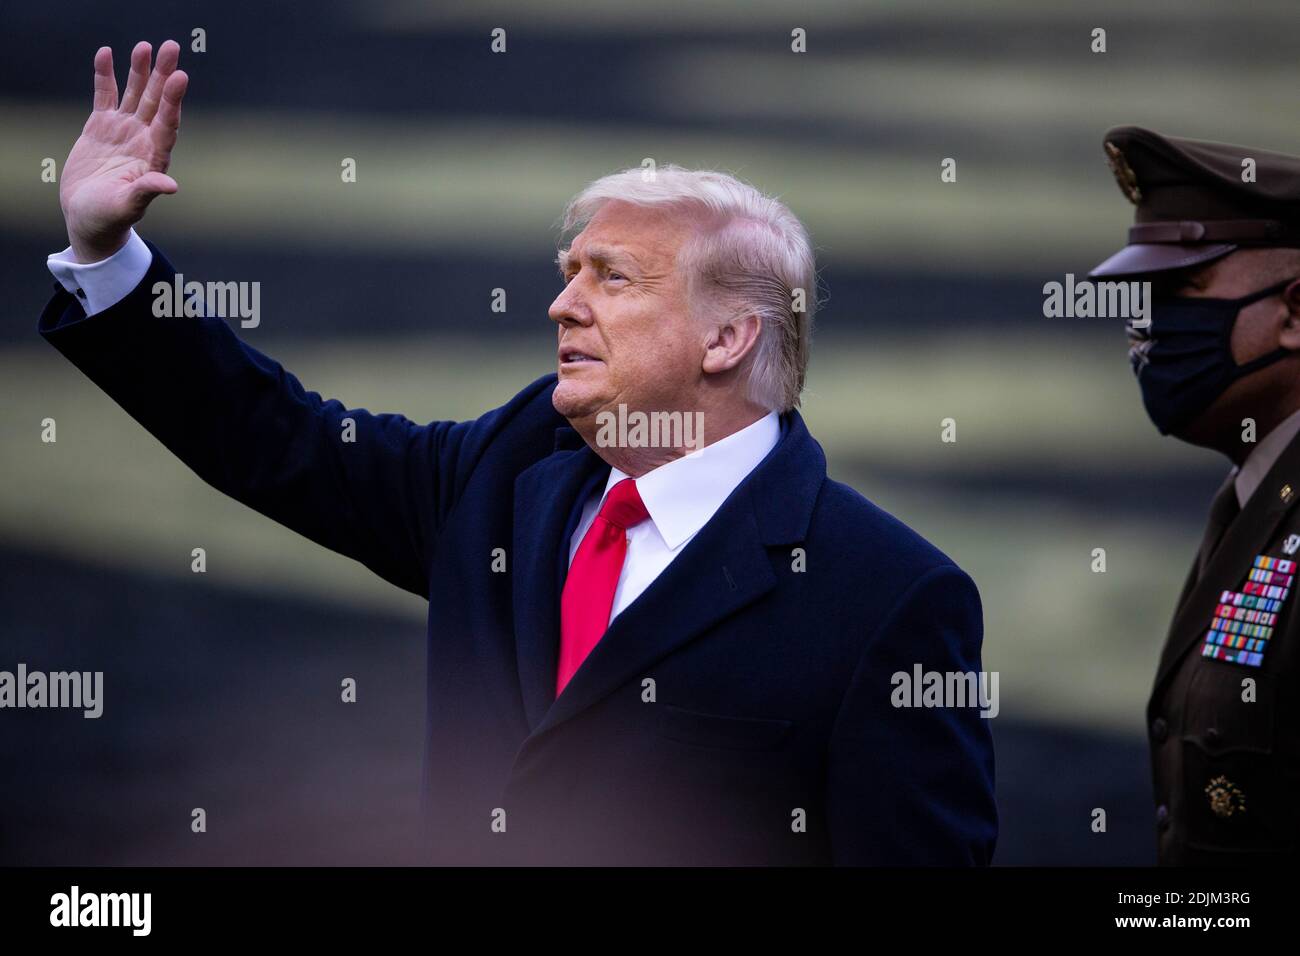 U.S. President Donald Trump waves as he arrives along the side-lines to visit with Army fans at the 121st Army-Navy football game at Michie Stadium December 12, 2019 in West Point, New York. The Army Black Knights shutout the Navy Midshipmen 15-0. Stock Photo